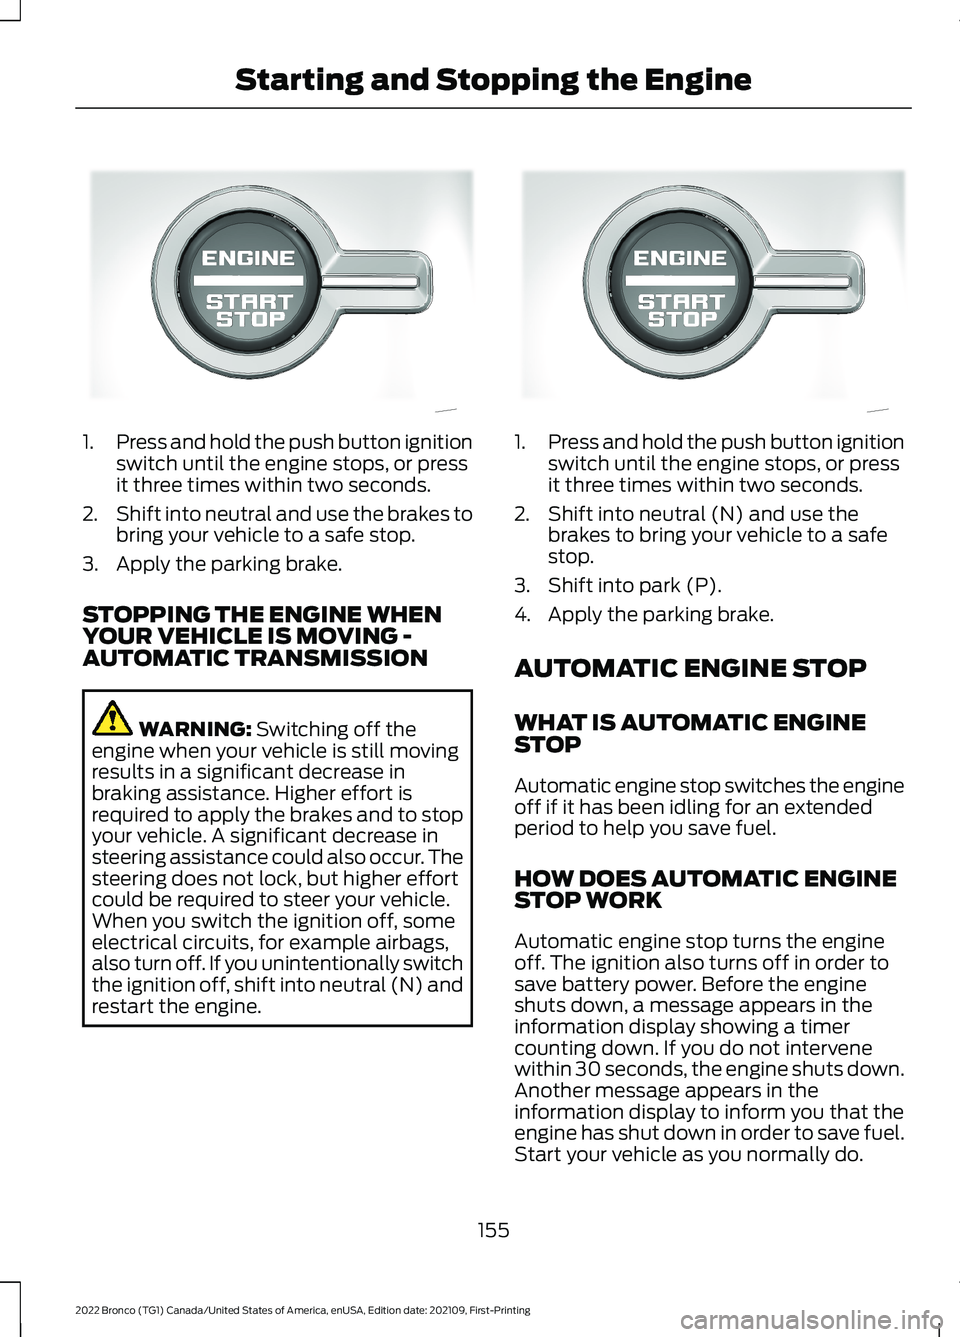 FORD BRONCO 2022  Owners Manual 1.Press and hold the push button ignitionswitch until the engine stops, or pressit three times within two seconds.
2.Shift into neutral and use the brakes tobring your vehicle to a safe stop.
3.Apply 